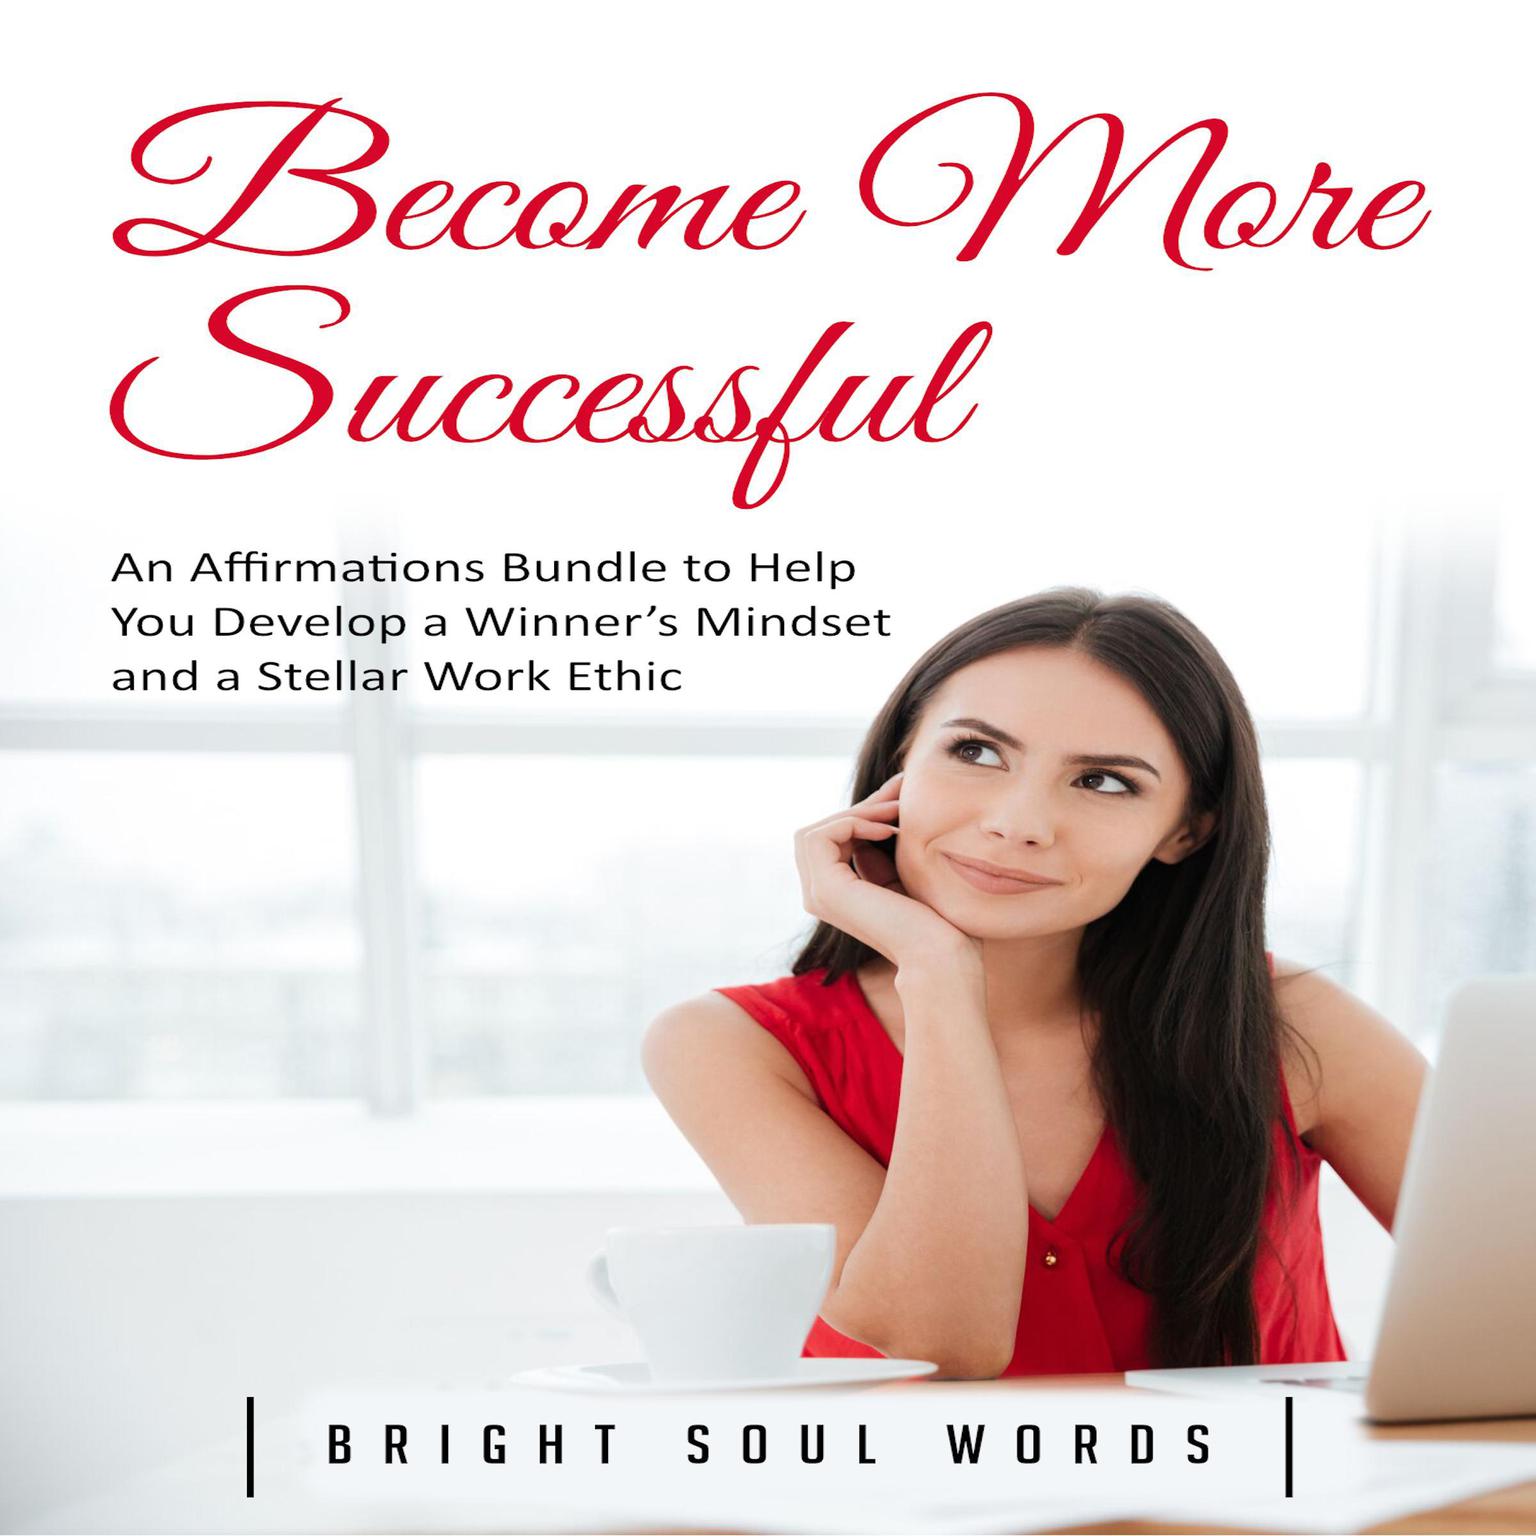 Become More Successful: An Affirmations Bundle to Help You Develop a Winner’s Mindset and a Stellar Work Ethic Audiobook, by Bright Soul Words